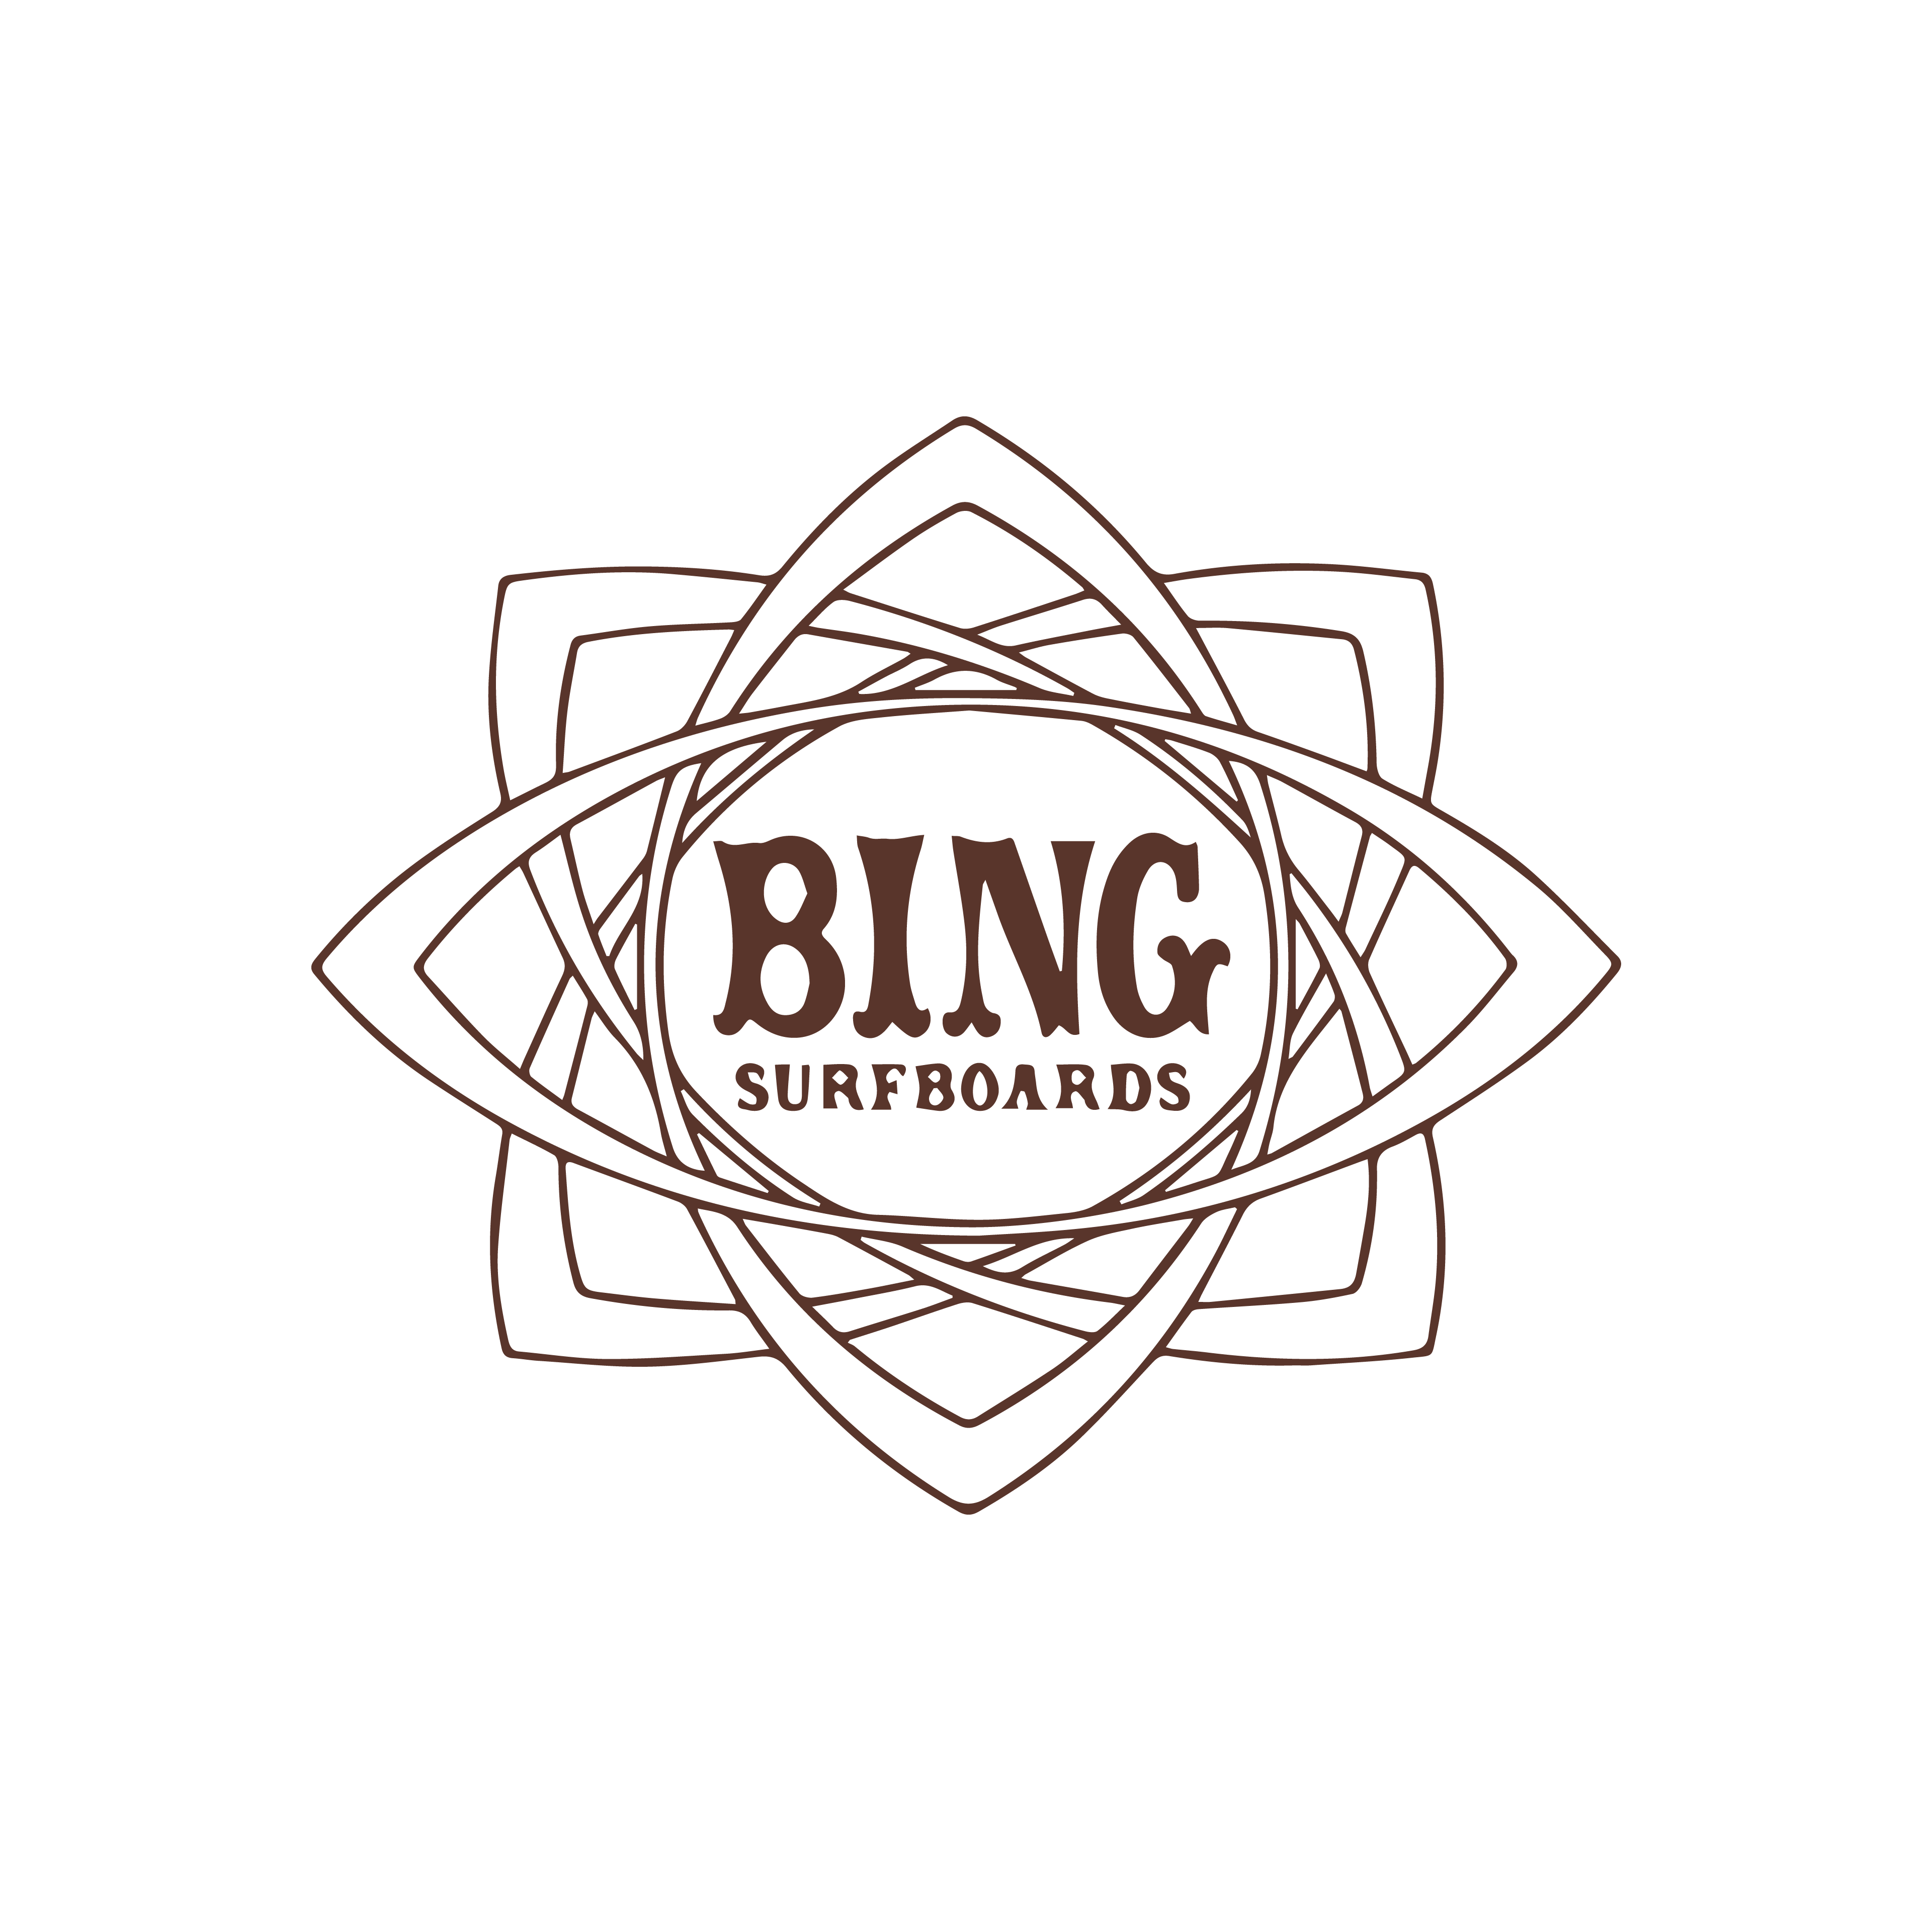 Bing is a local surf shop in Encinitas, CA that carries wonderfully crafted surfboards and some of the best logs around. 